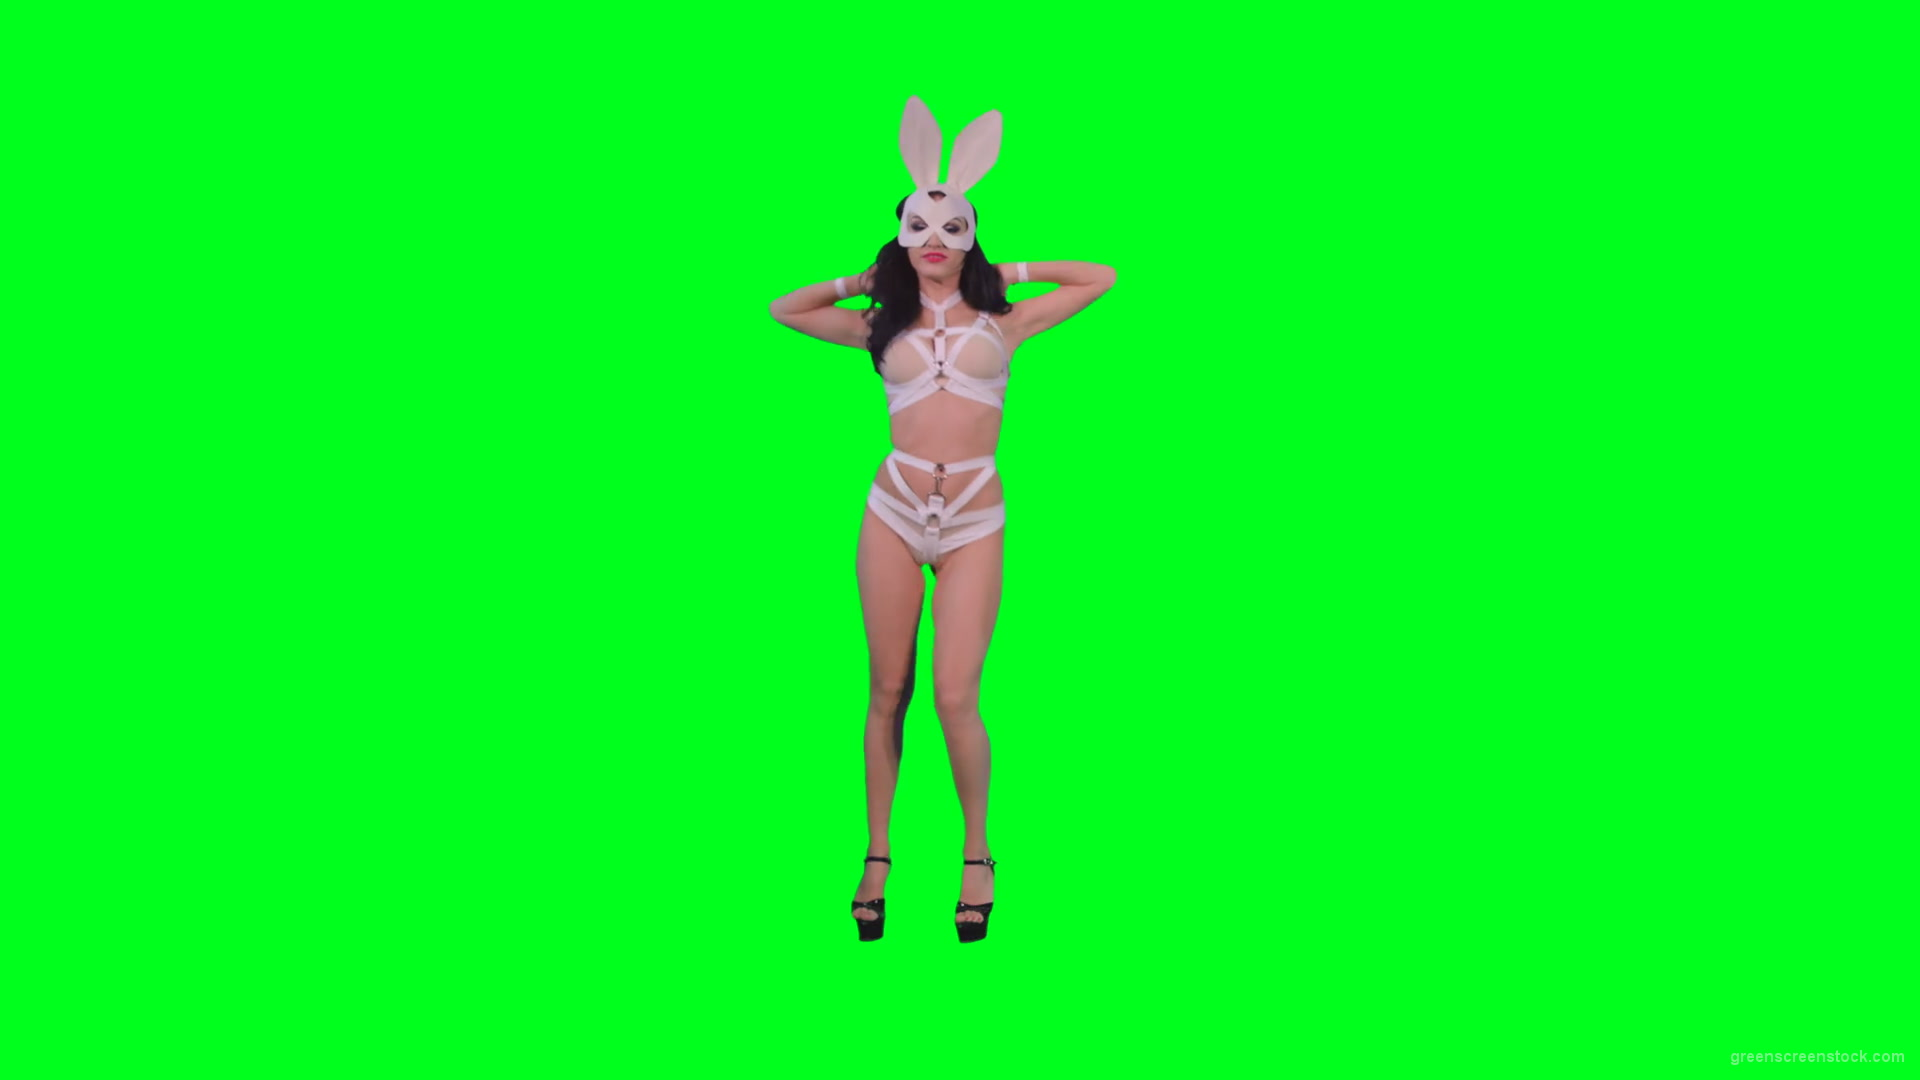 Black-hair-sexy-girl-in-playboy-costume-dancing-go-go-on-green-screen-4K-Video-Footage-1920_006 Green Screen Stock